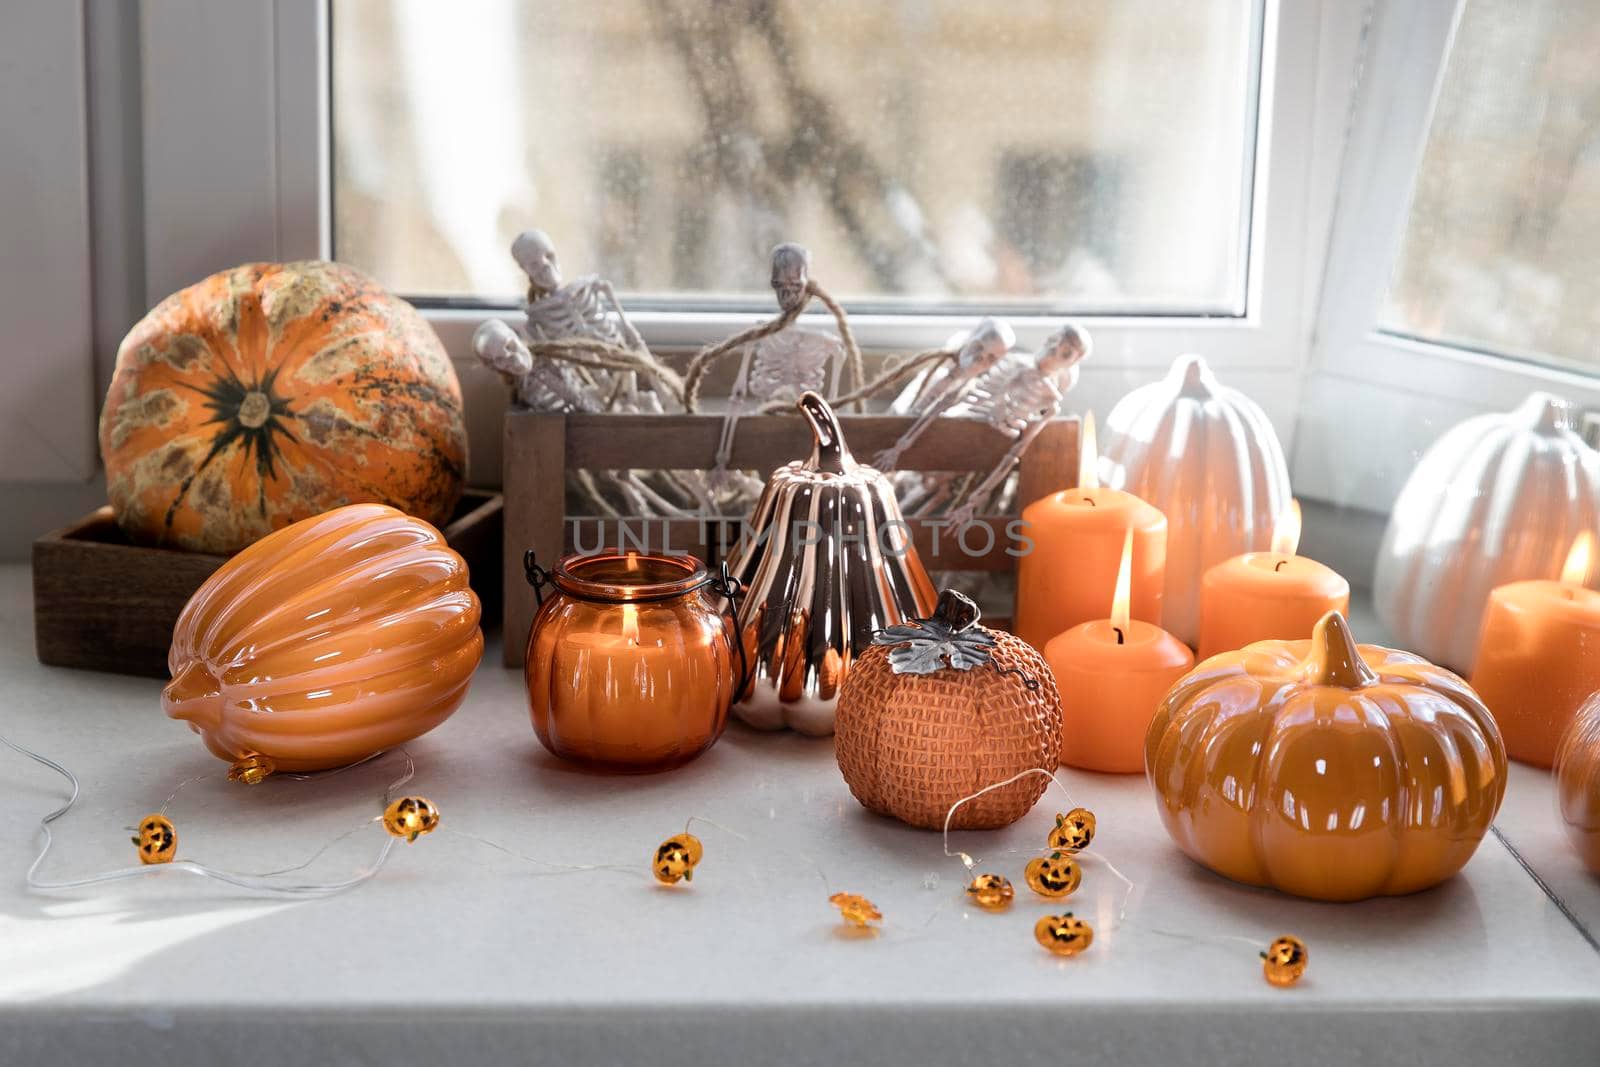 Porcelain and natural pumpkins, orange candles on a white table, Halloween decorations. by elenarostunova